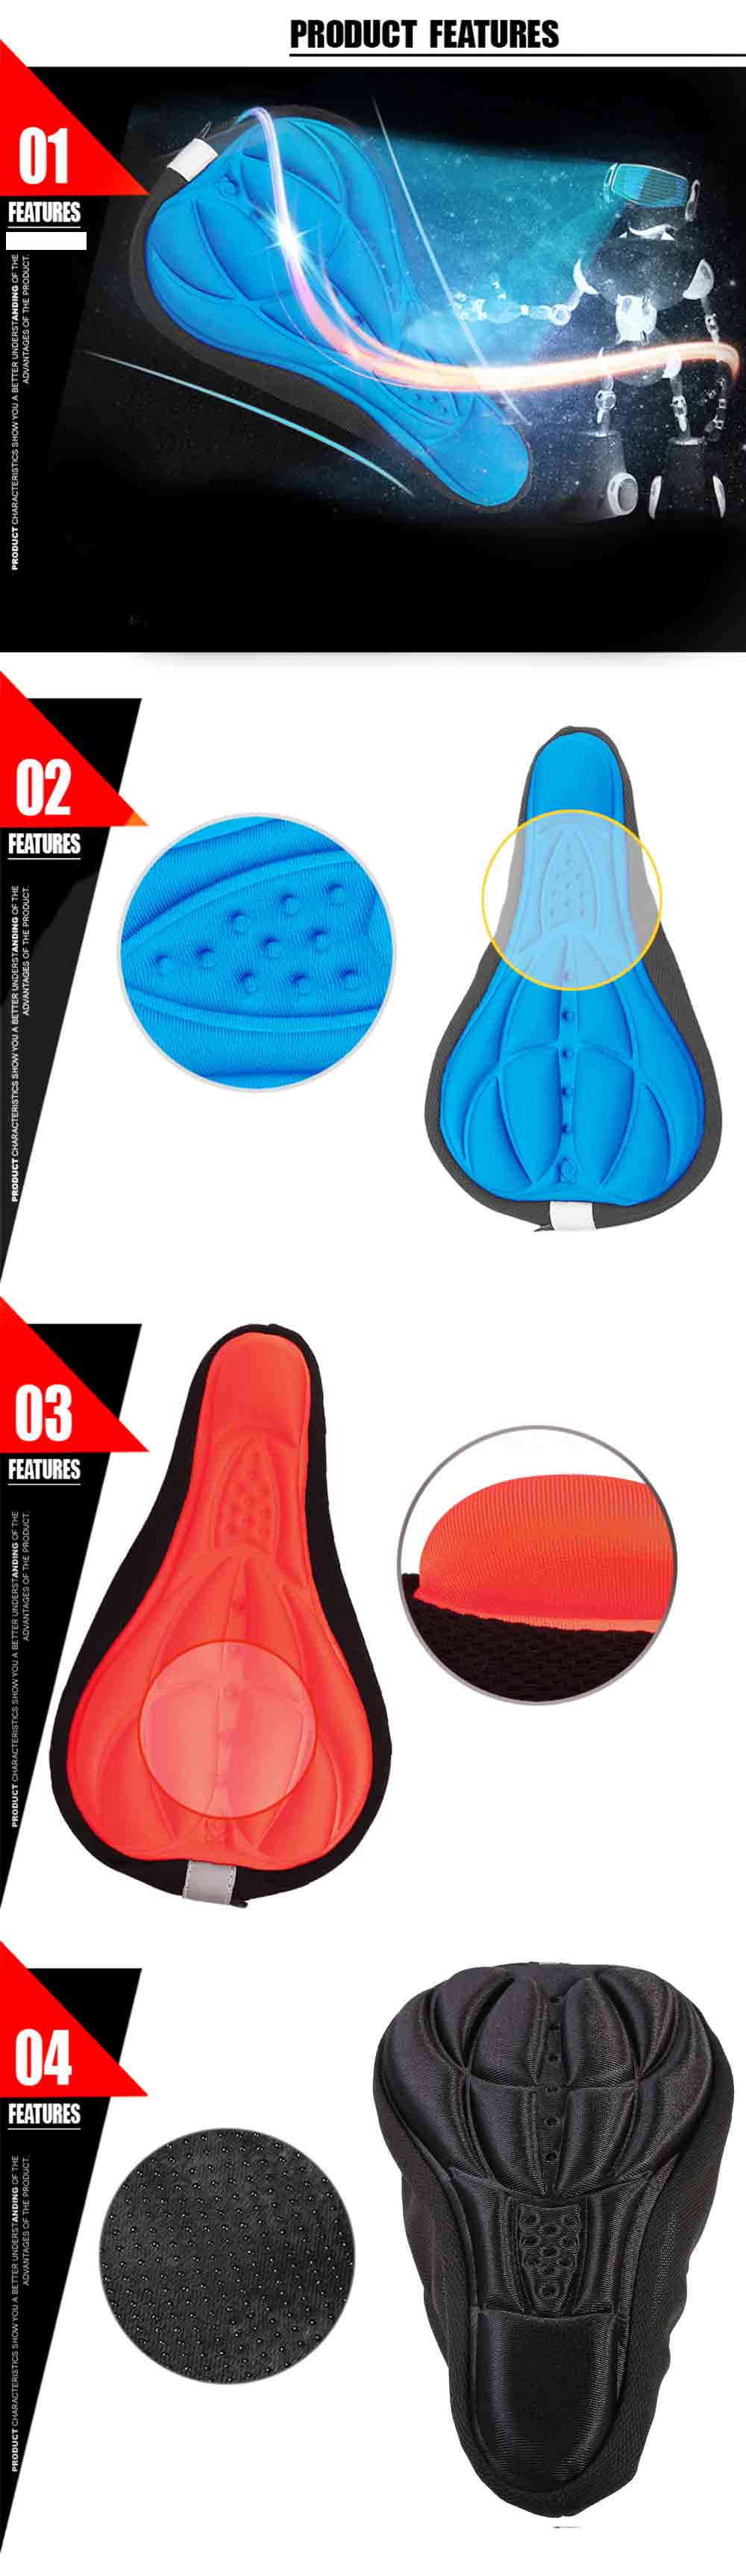 3D Silicone Soft Saddle Seat Cover for Cycling